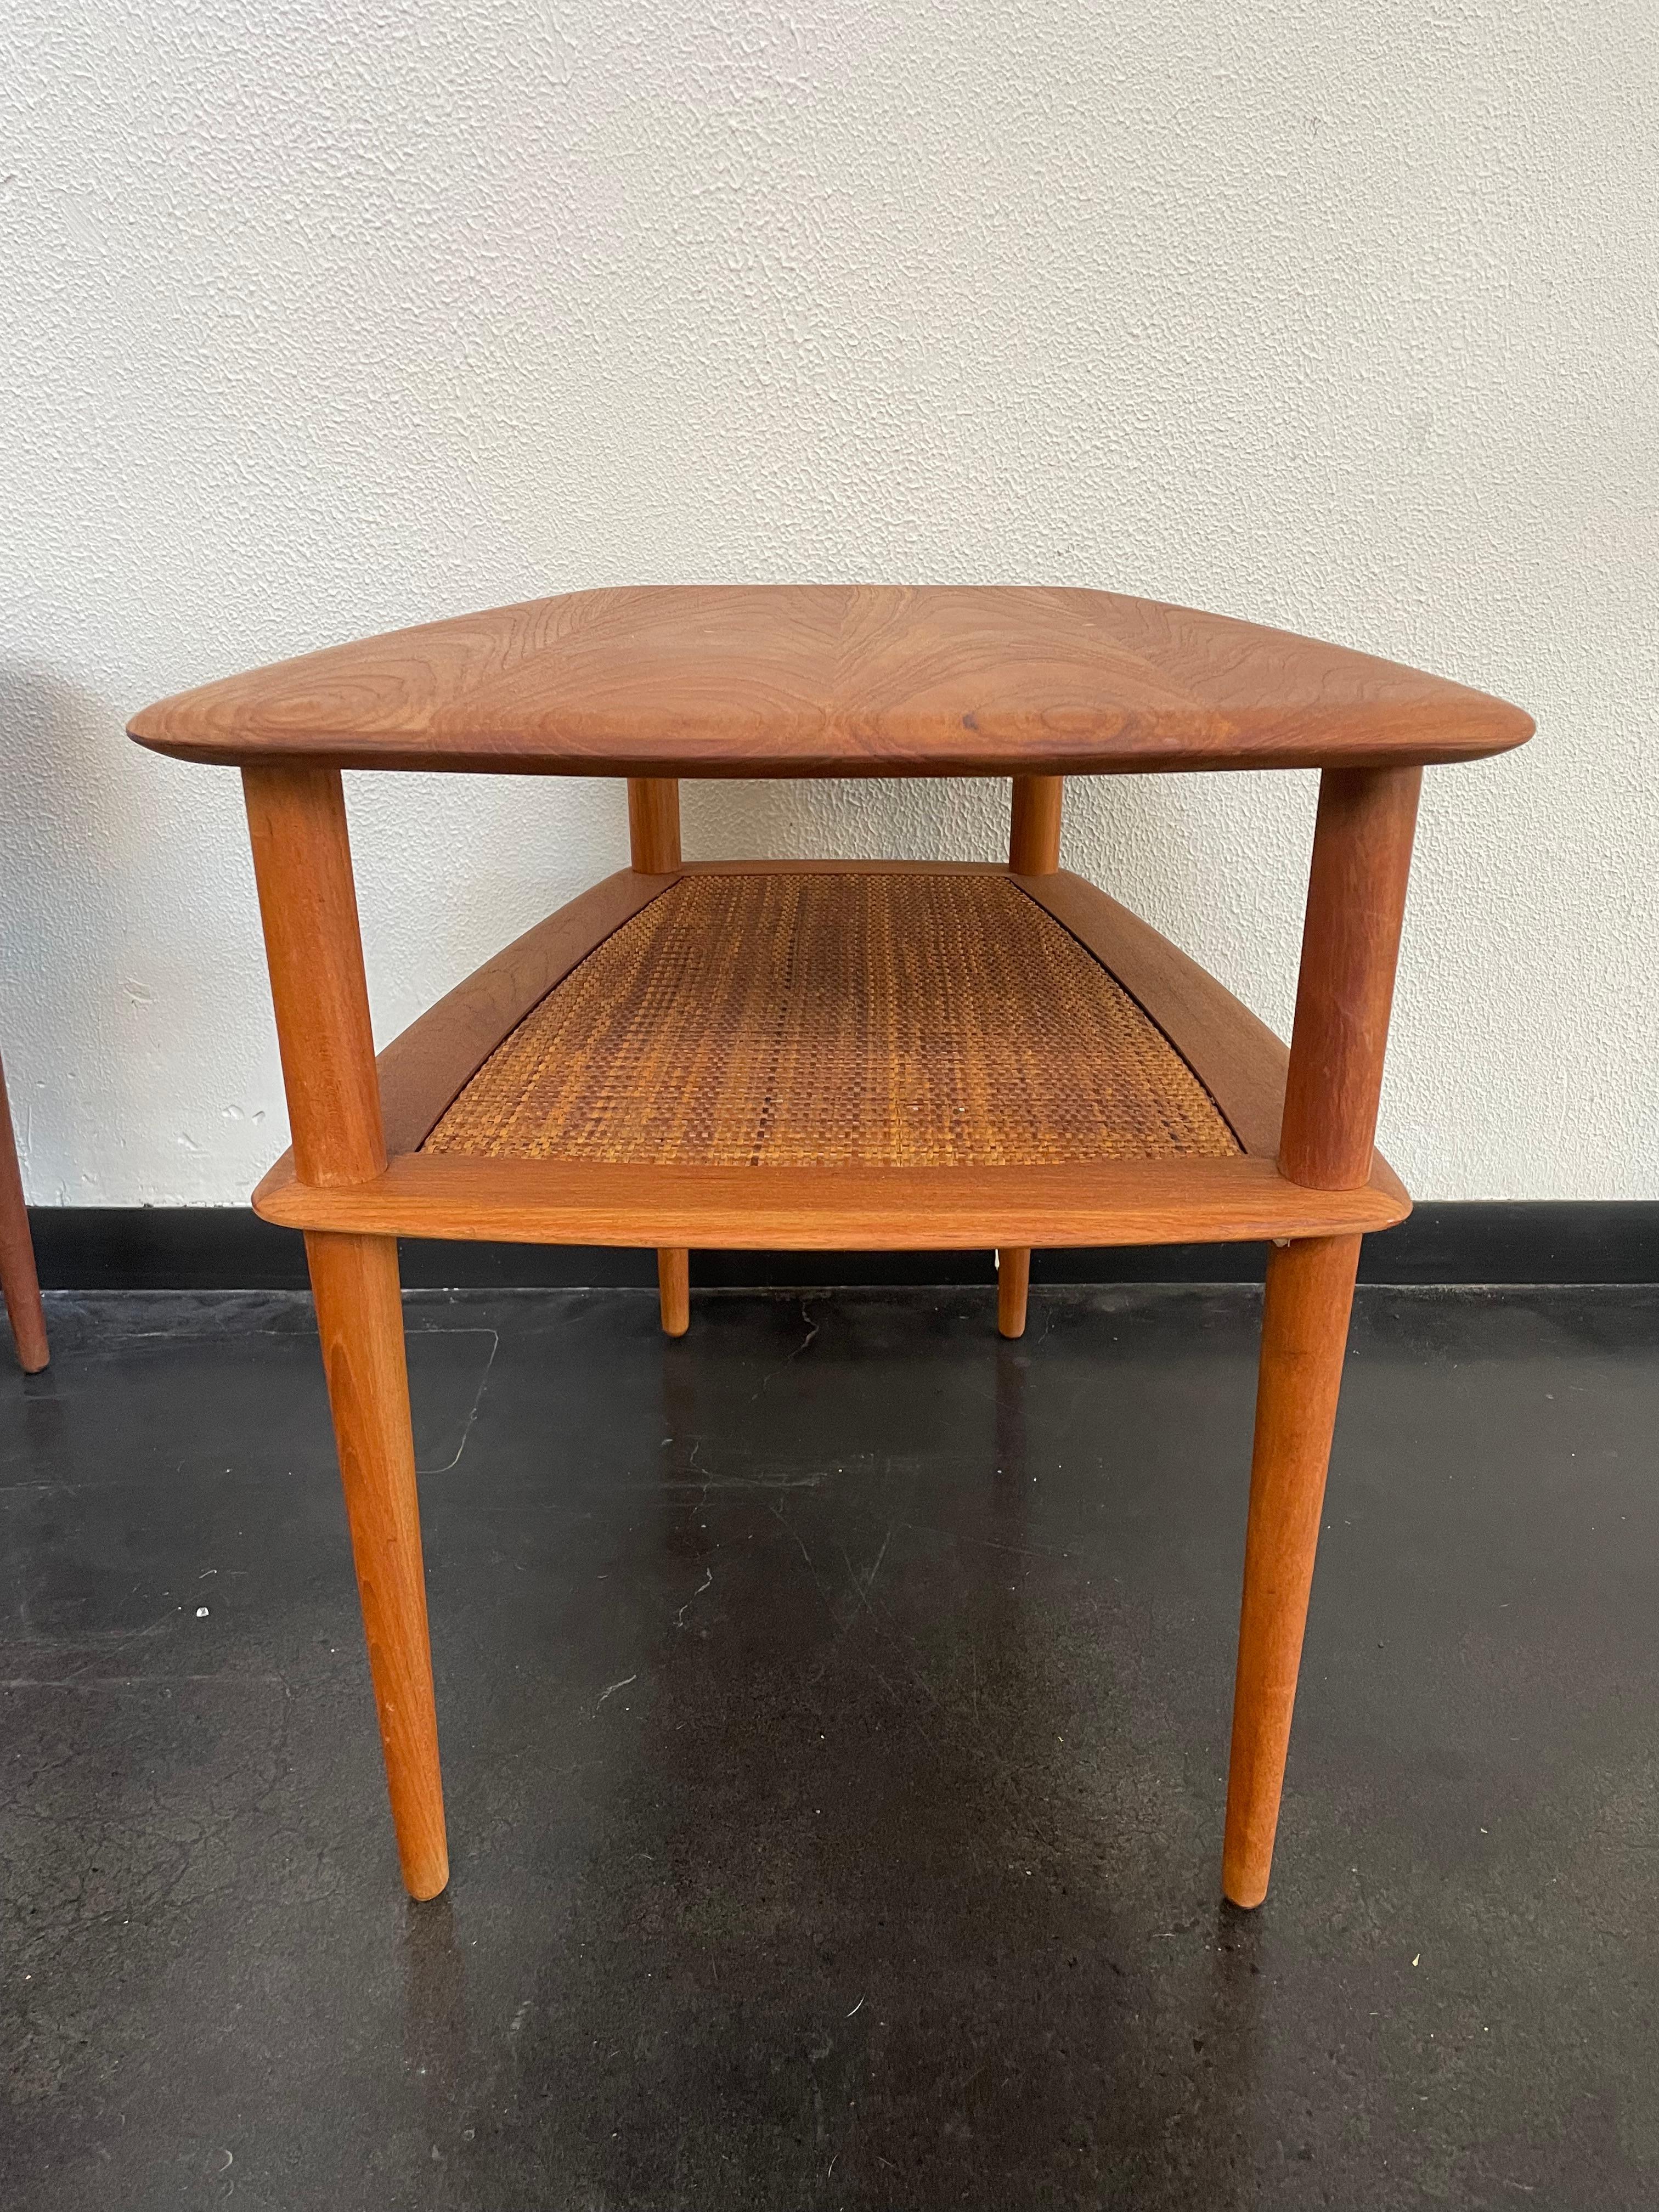 Danish Peter Hvidt France and Son Teak End Tables, a Pair In Good Condition For Sale In Philadelphia, PA